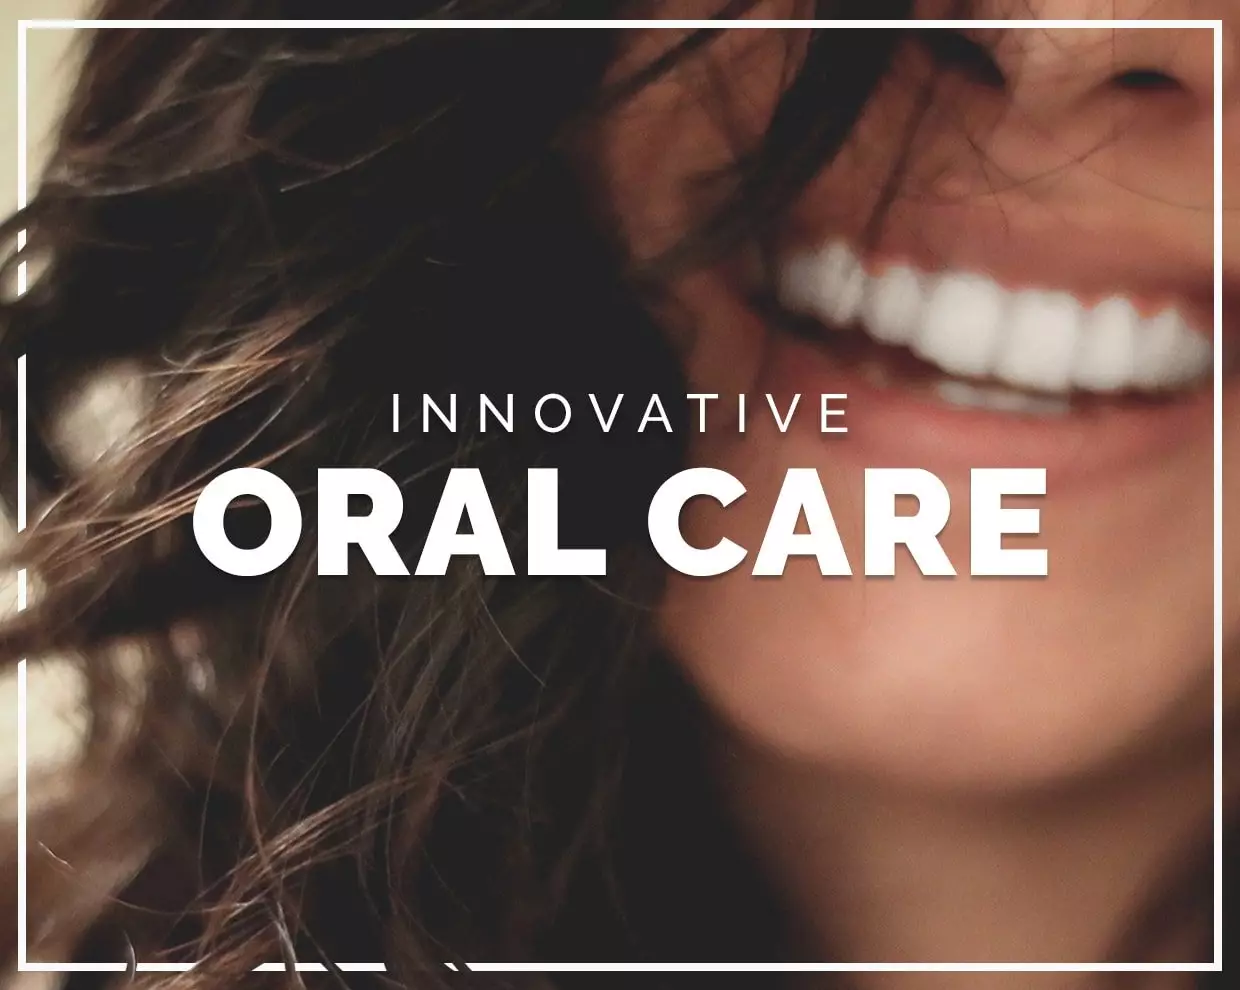 Functional Self launches Dr Hisham’s Natural Oral Care System